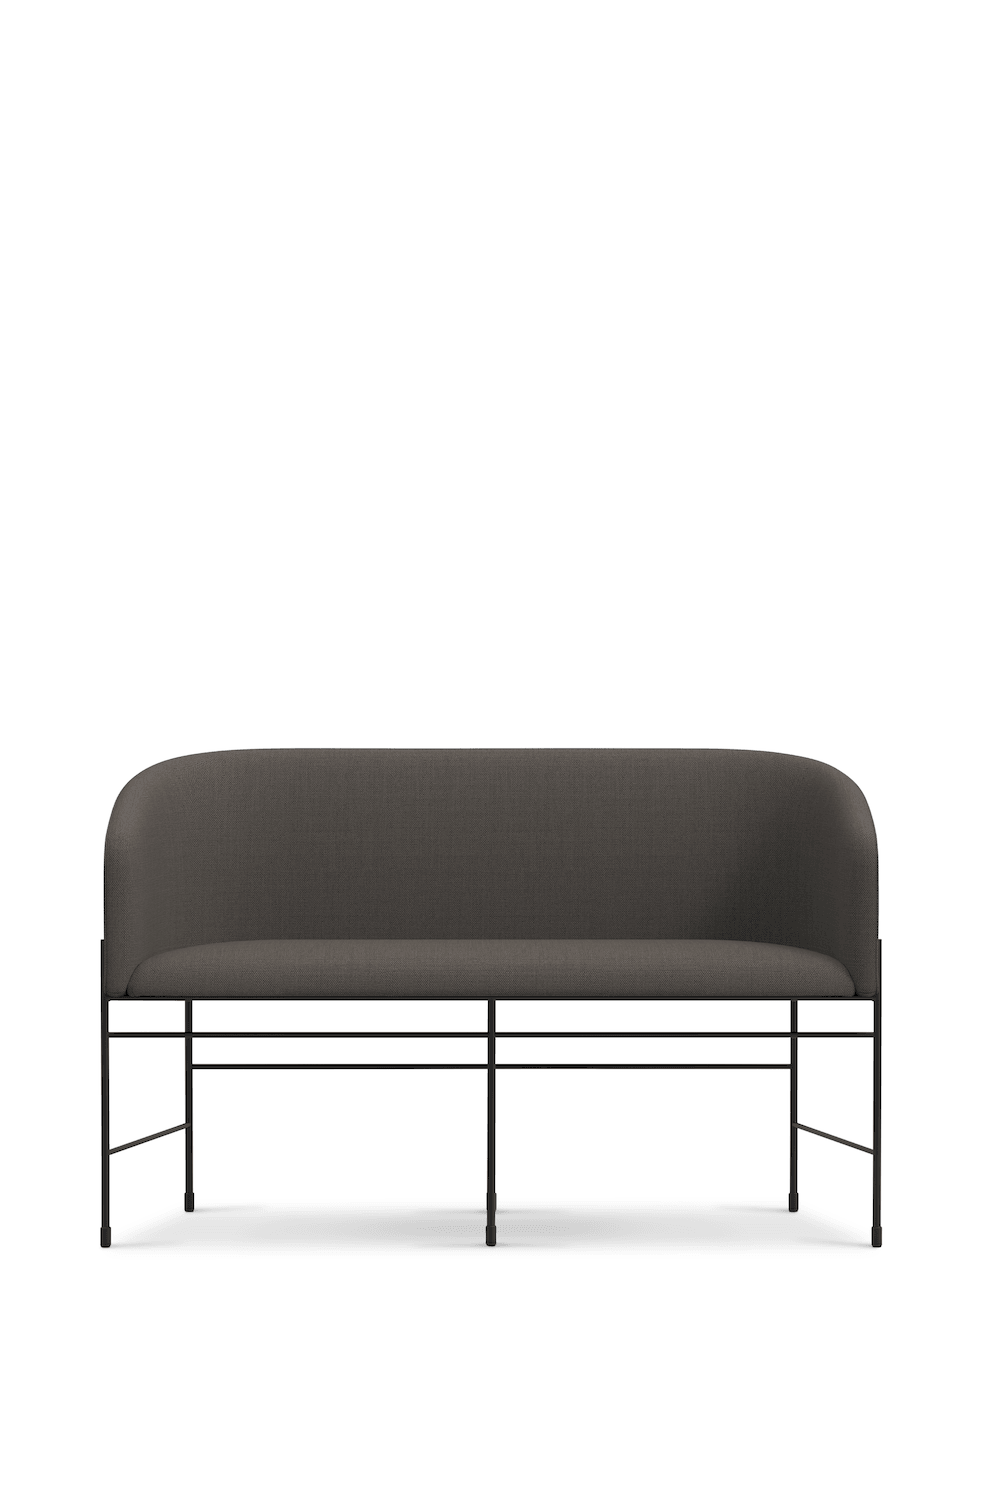 Covent Love Seater - The Design Part